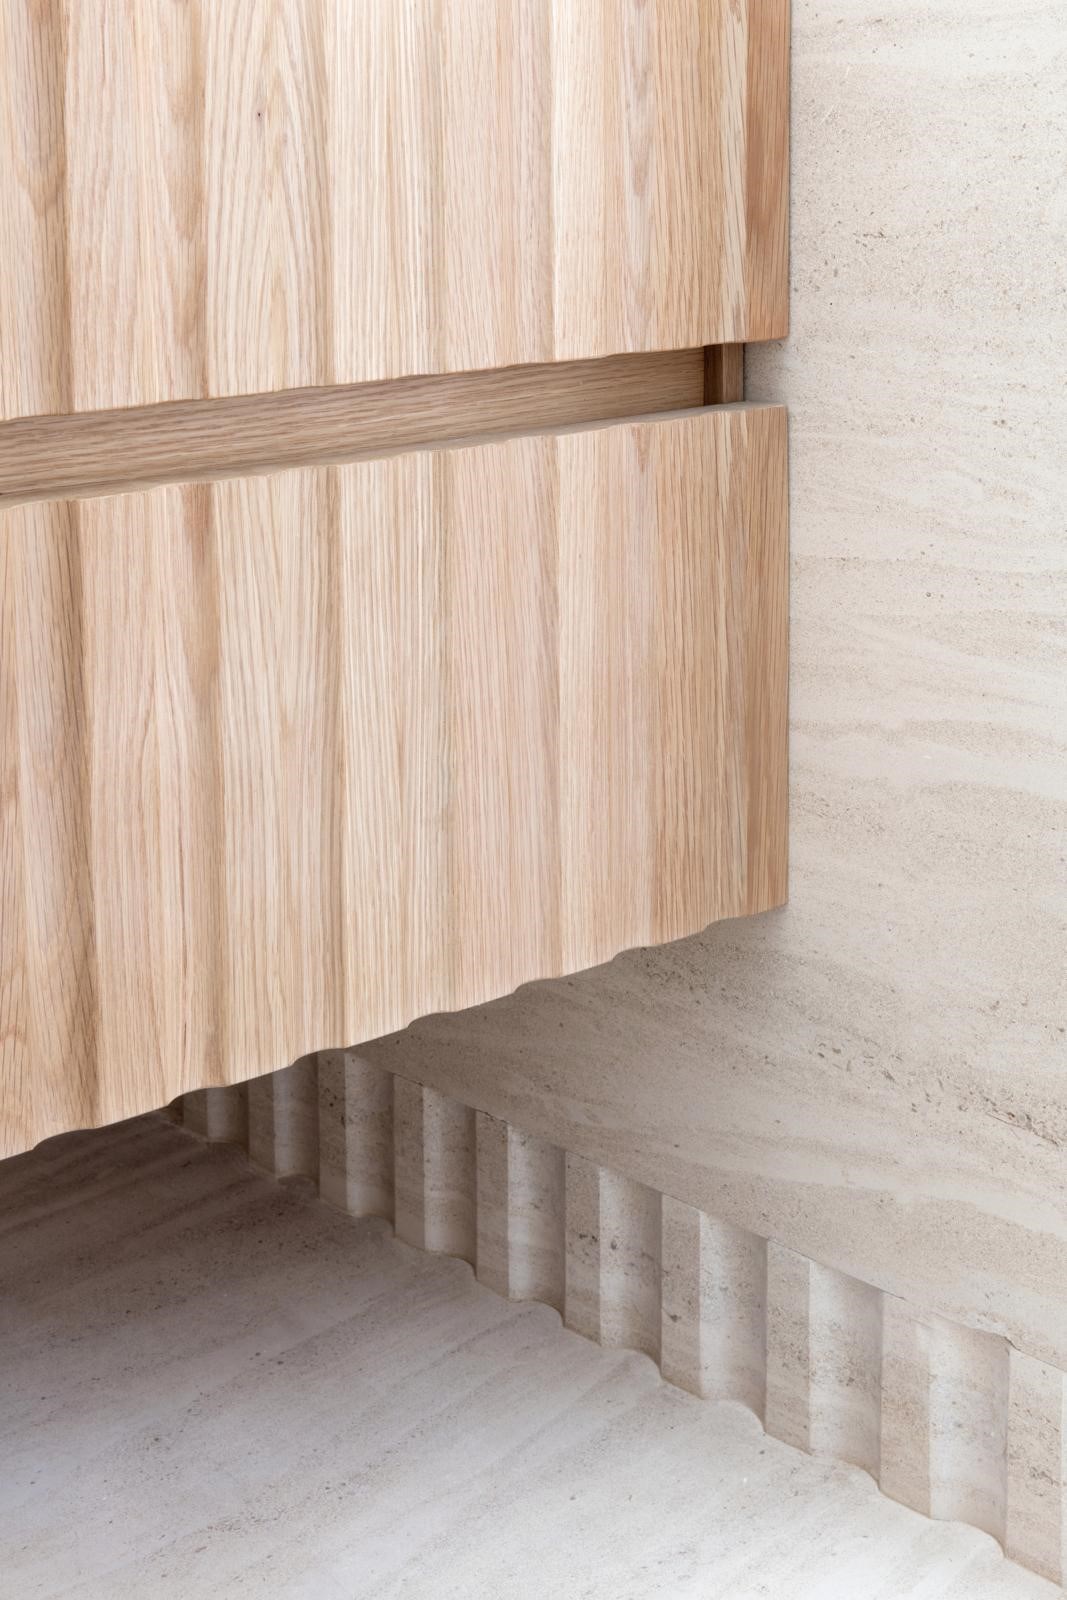 Mont Doré limestone ribbed baseboard detail matching with ribbed oak vanity